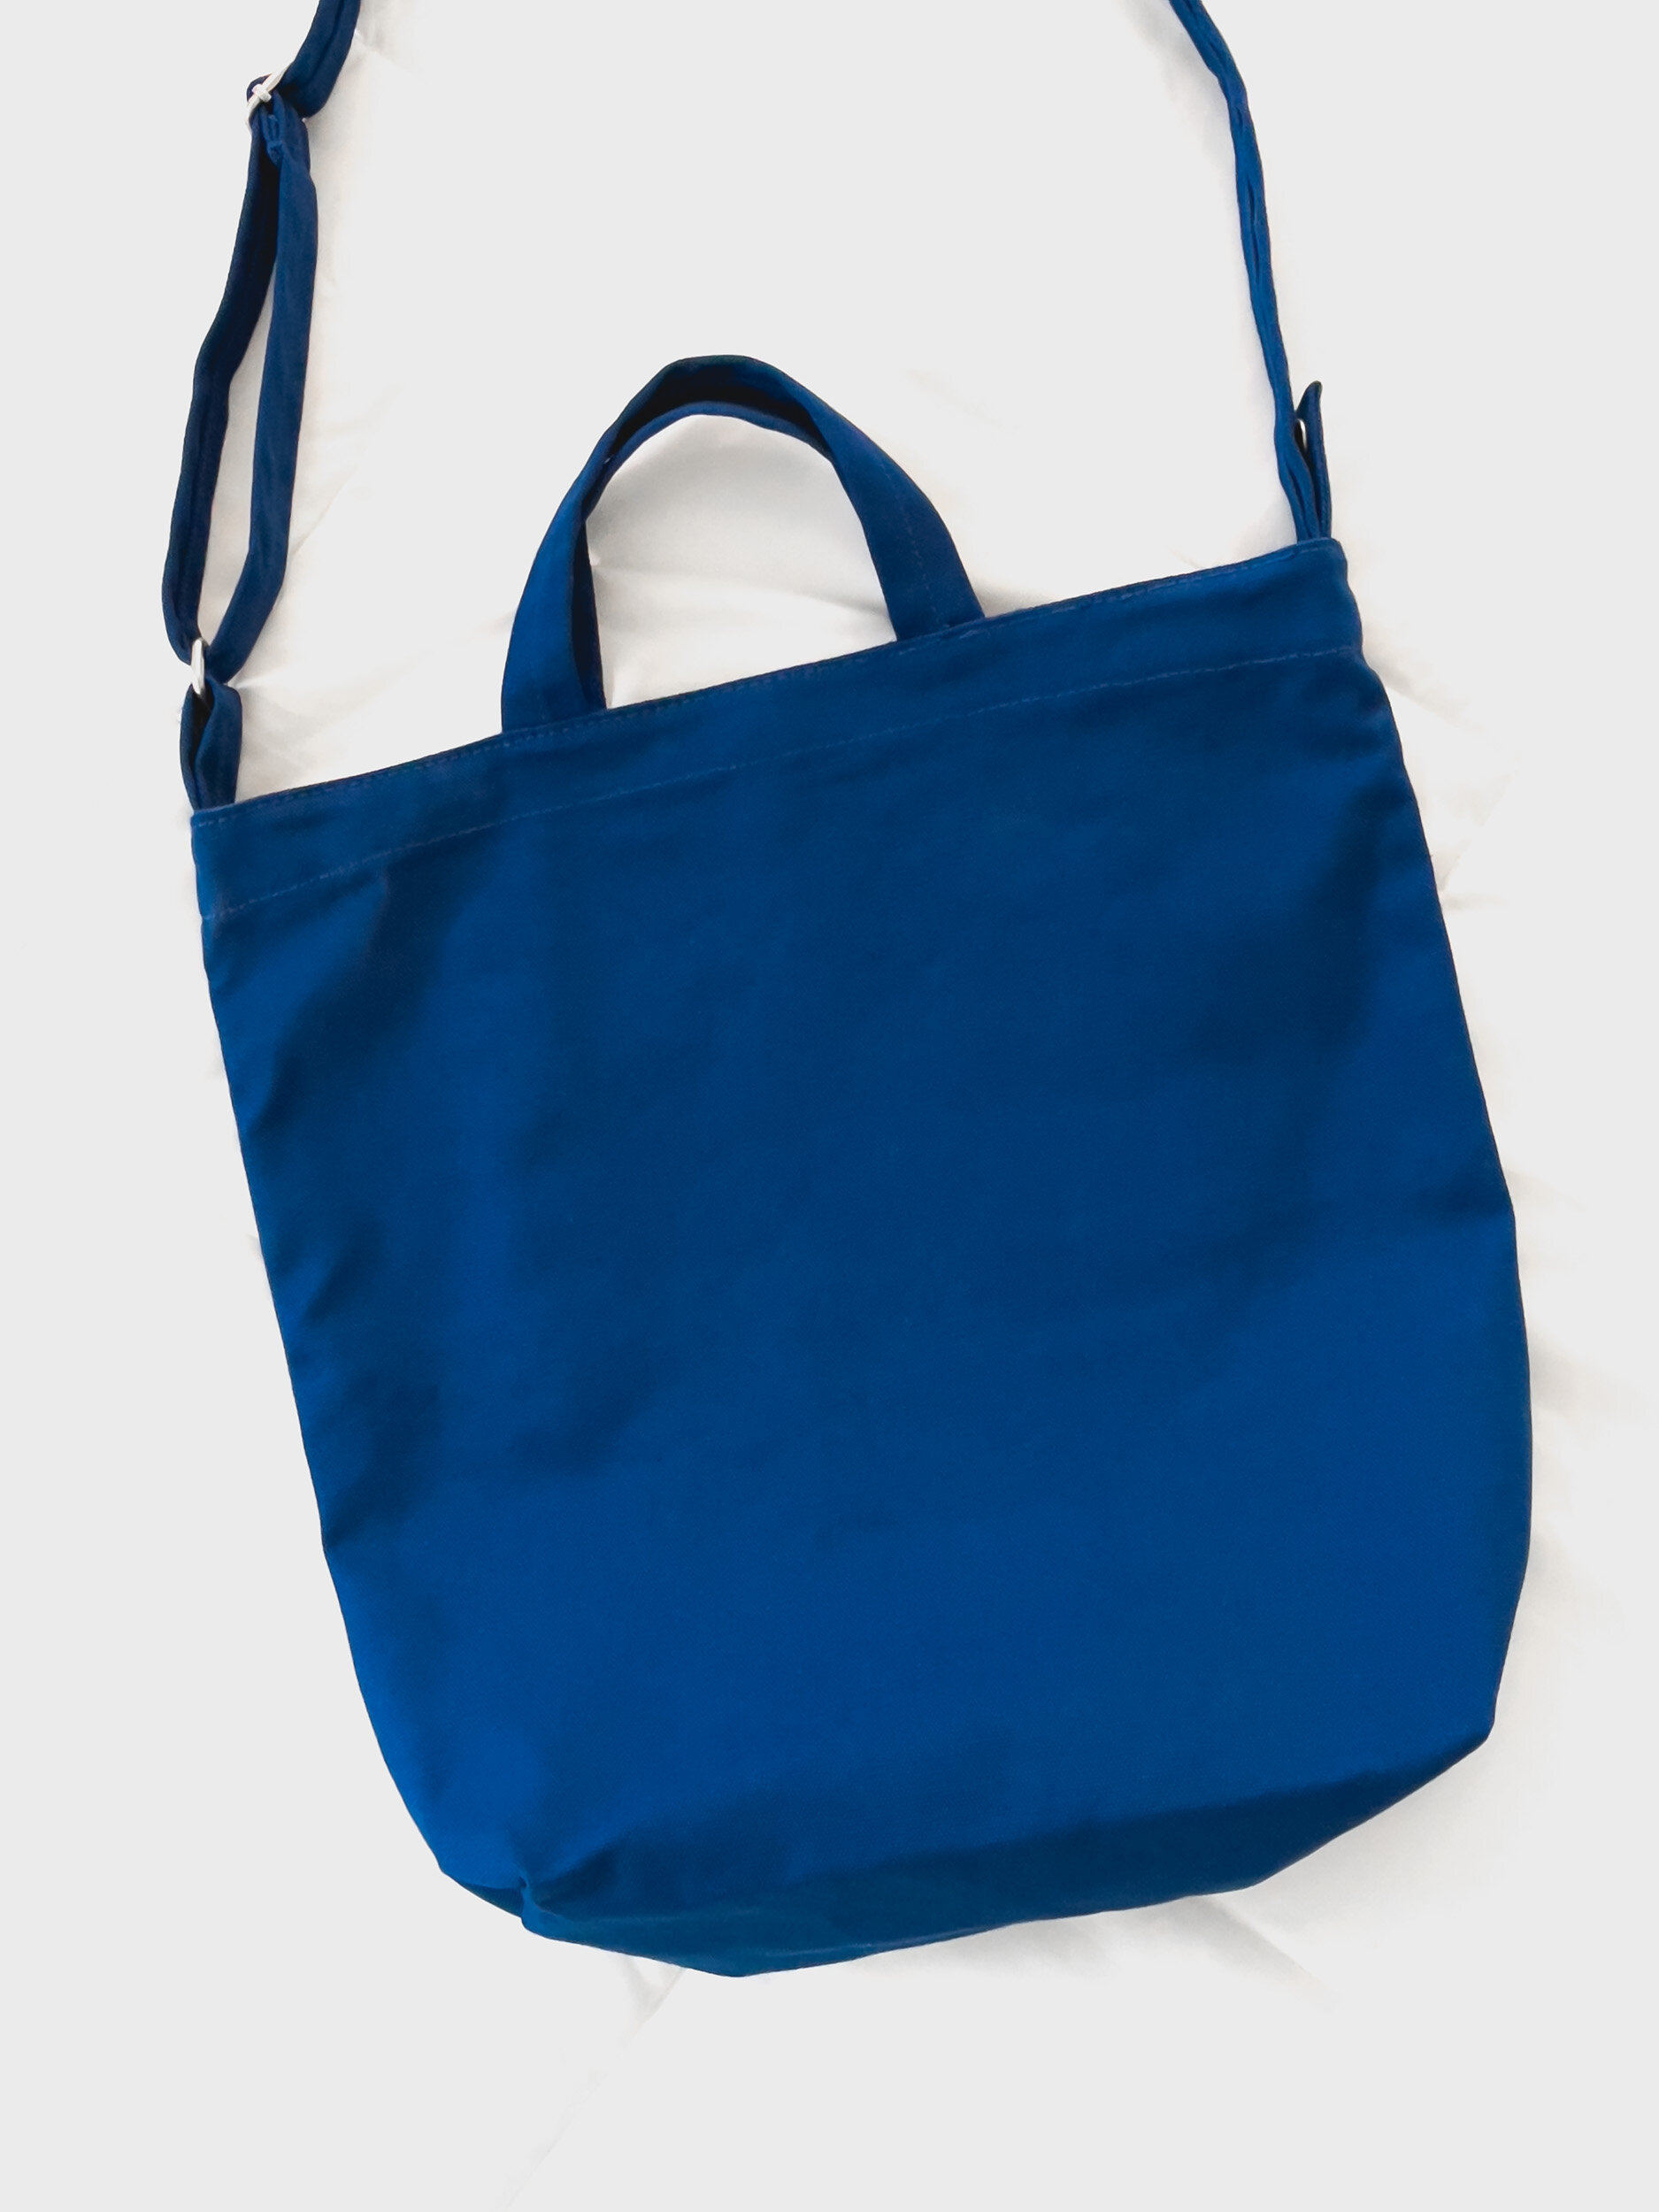 Baggu Duck Bag Review | A lightweight washable canvas tote